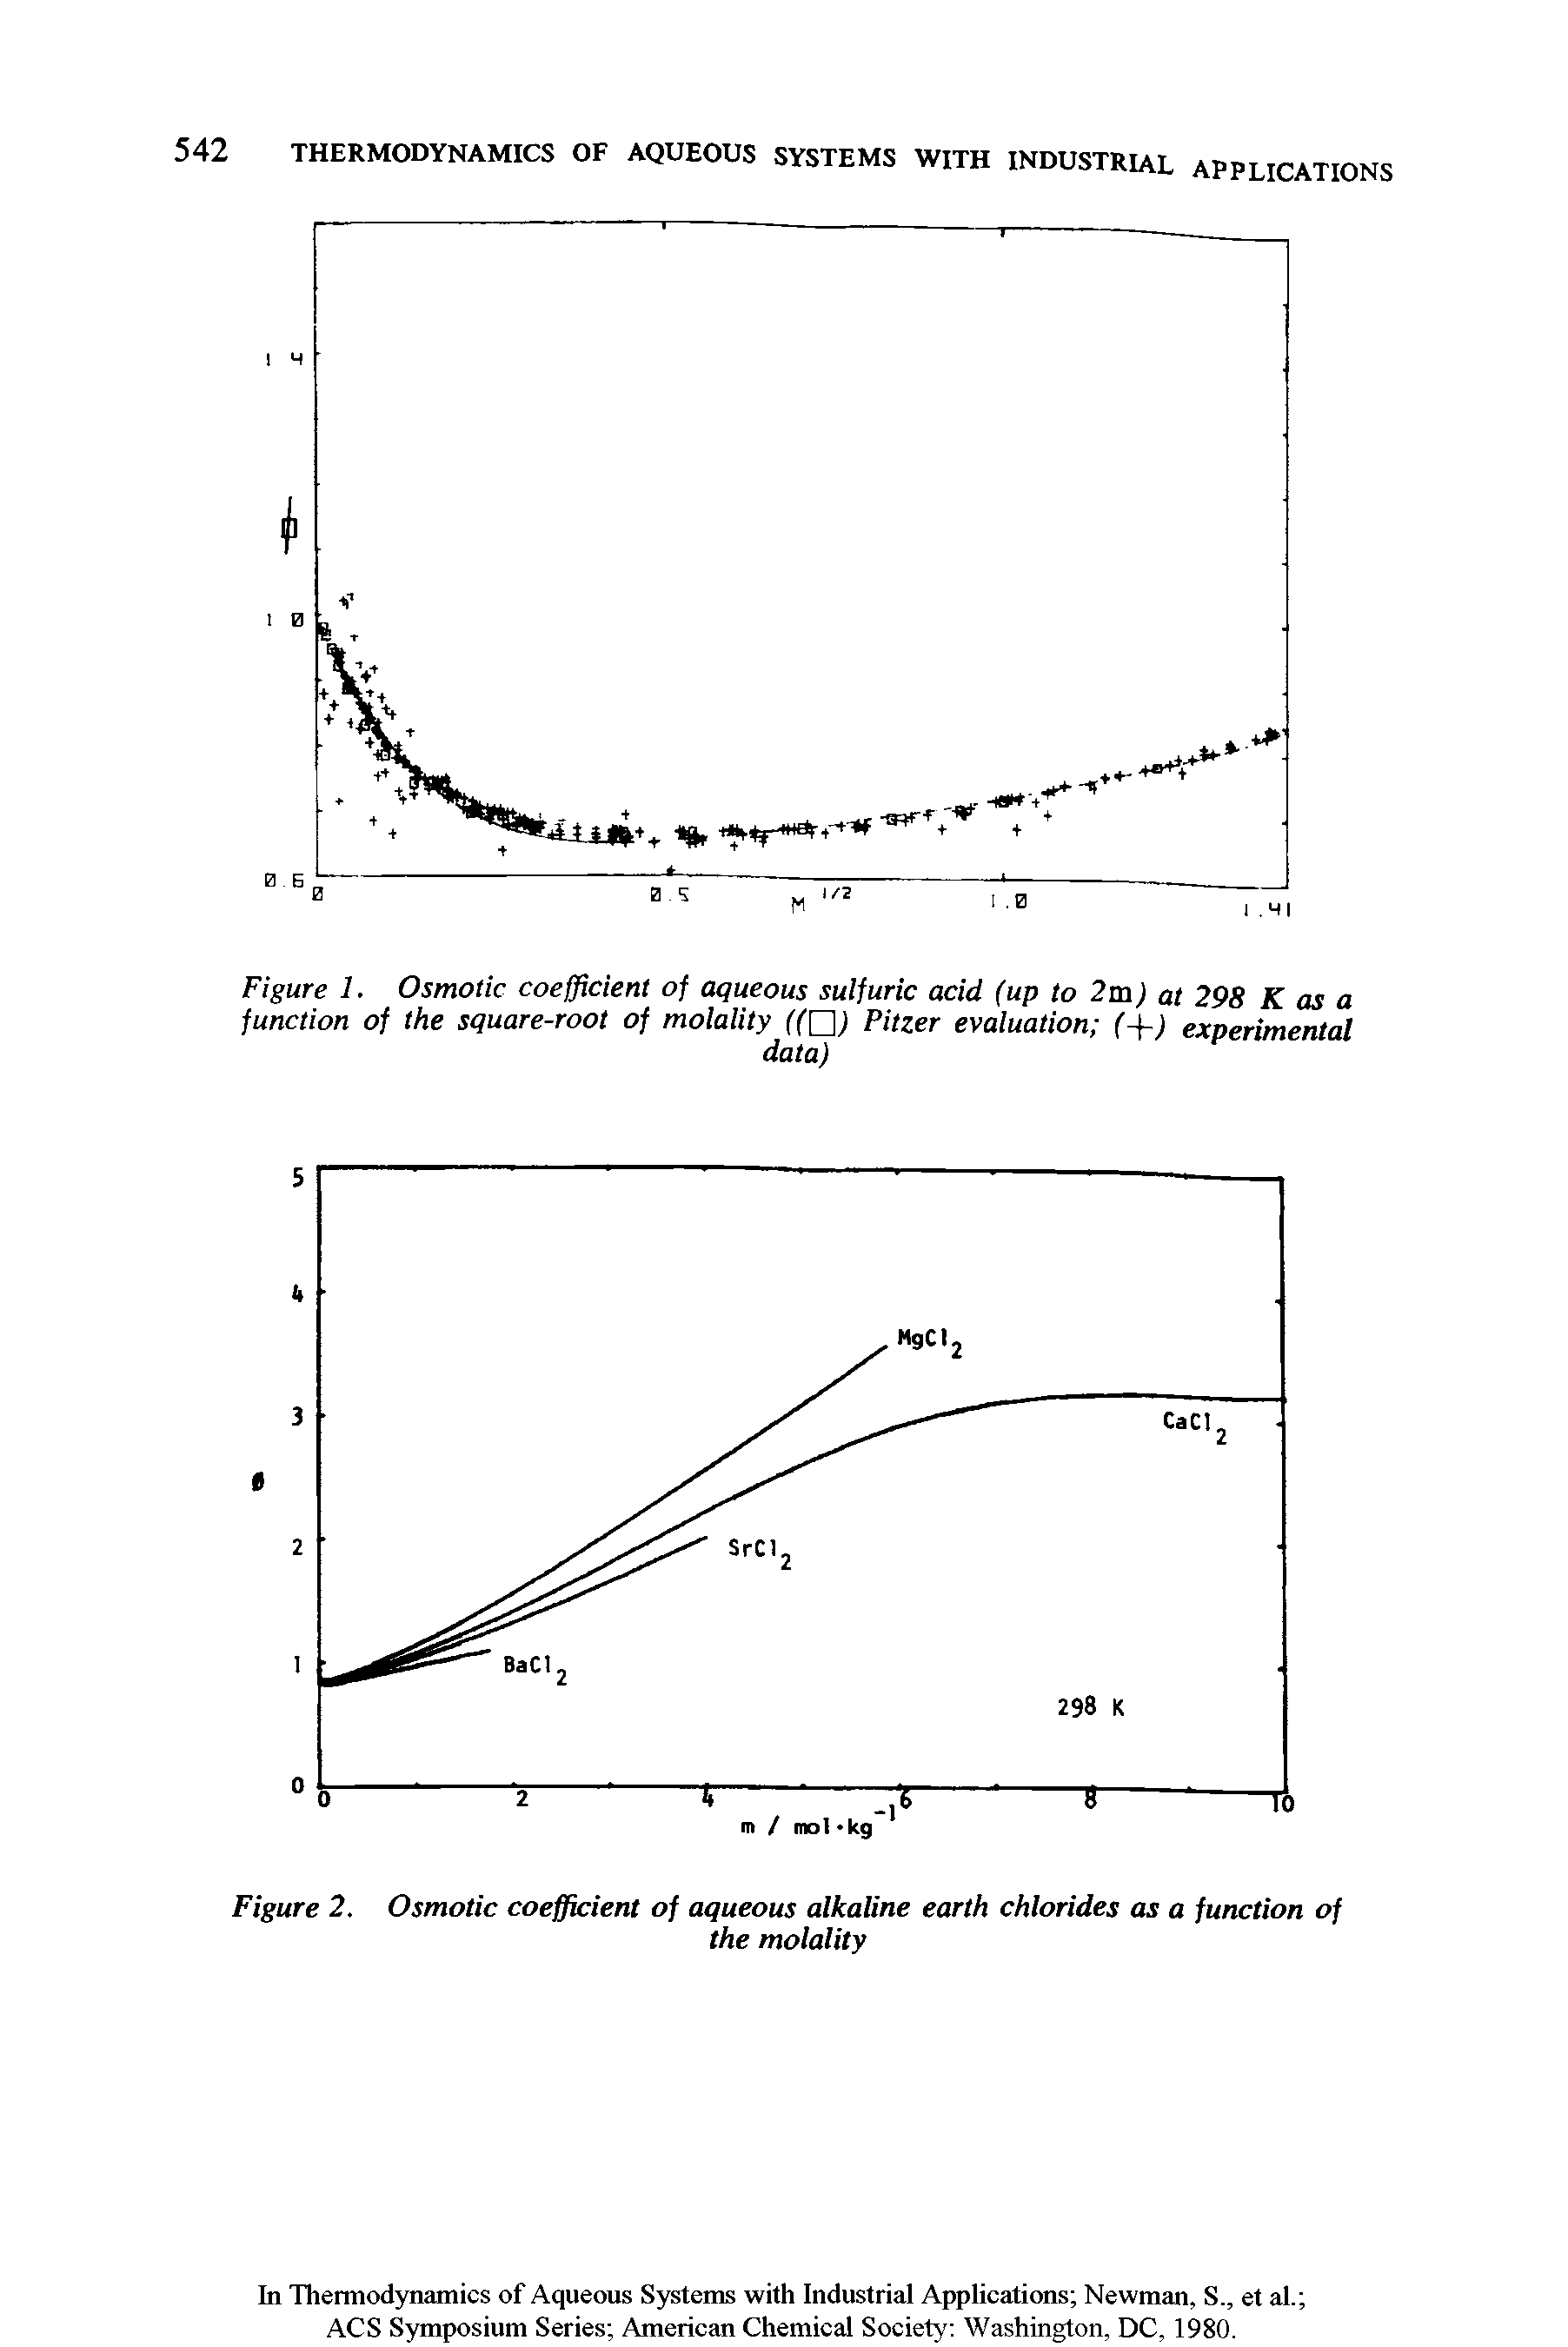 Figure 1. Osmotic coefficient of aqueous sulfuric acid (up to 2m) at 298 K as a function of the square-root of molality ((Q) Pitzer evaluation ( -) experimental...